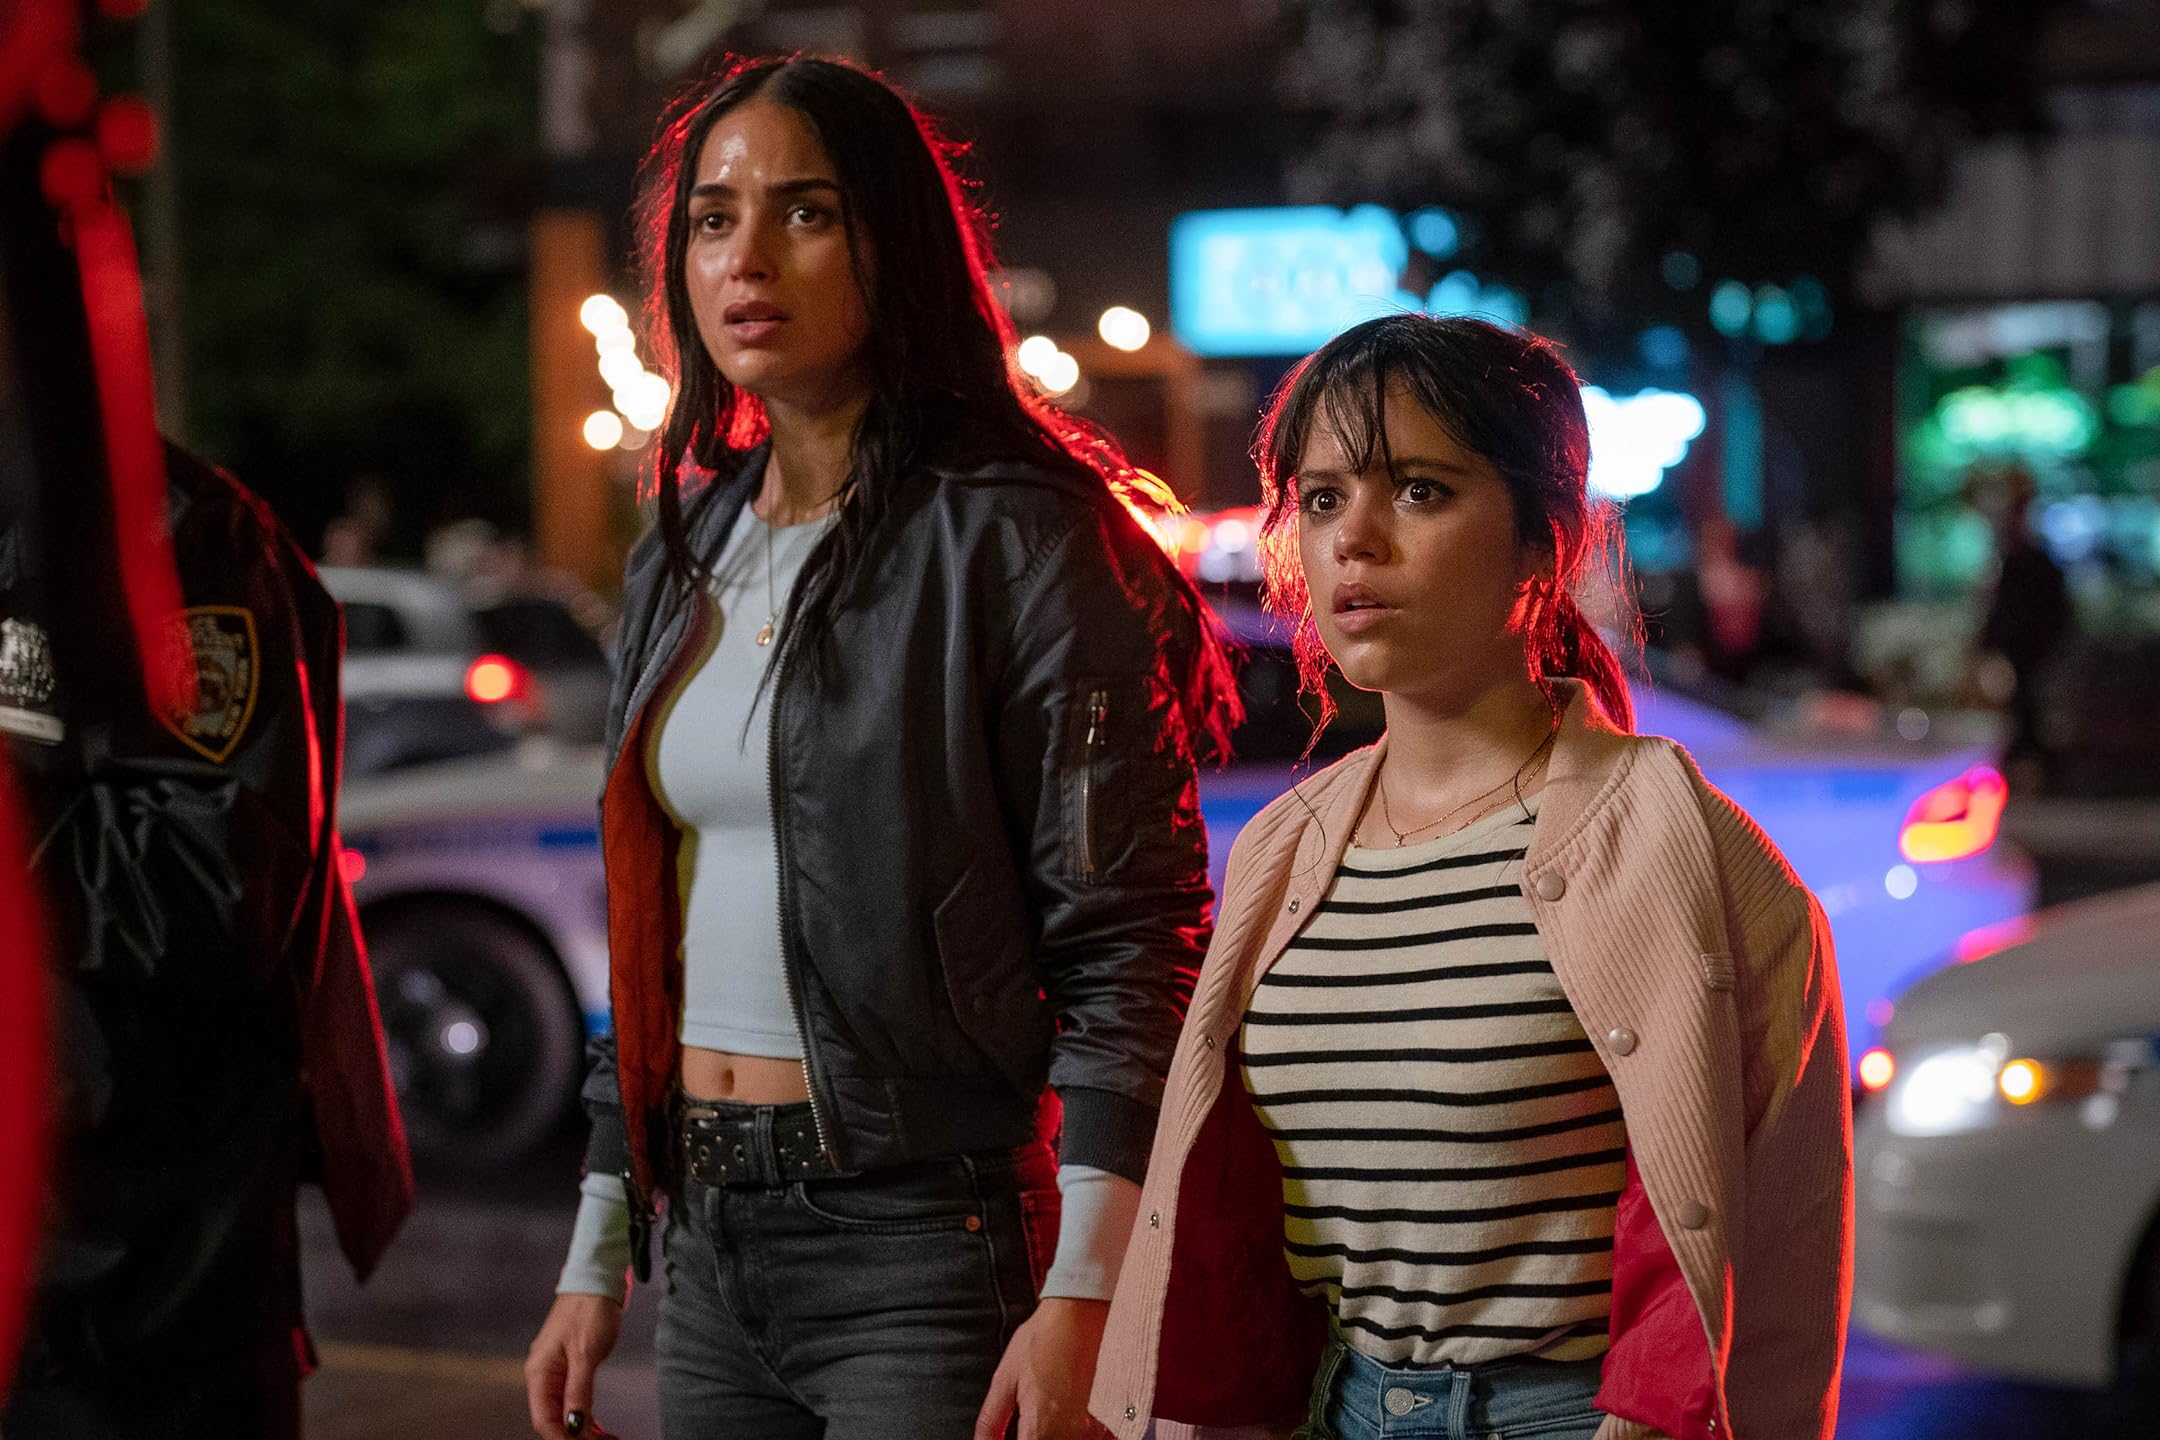 Melissa Barrera and Jenna Ortega stand beside police cars during a scene on a New York street in Scream 6.